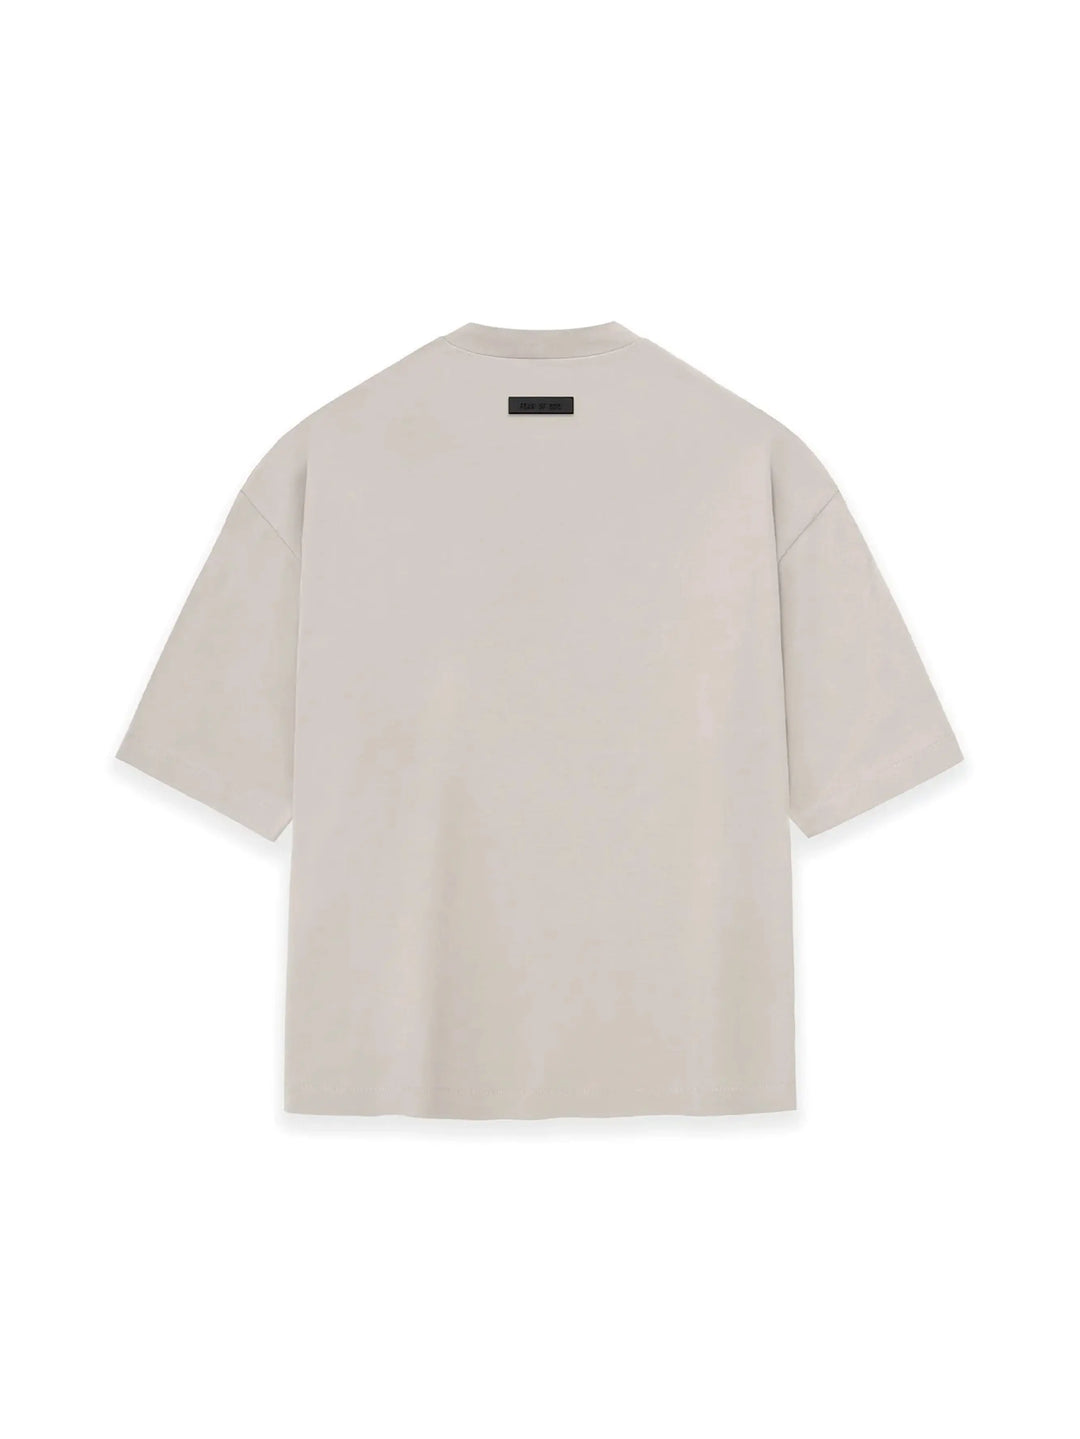 Fear of God Essentials Tee Silver Cloud in Auckland, New Zealand - Shop name